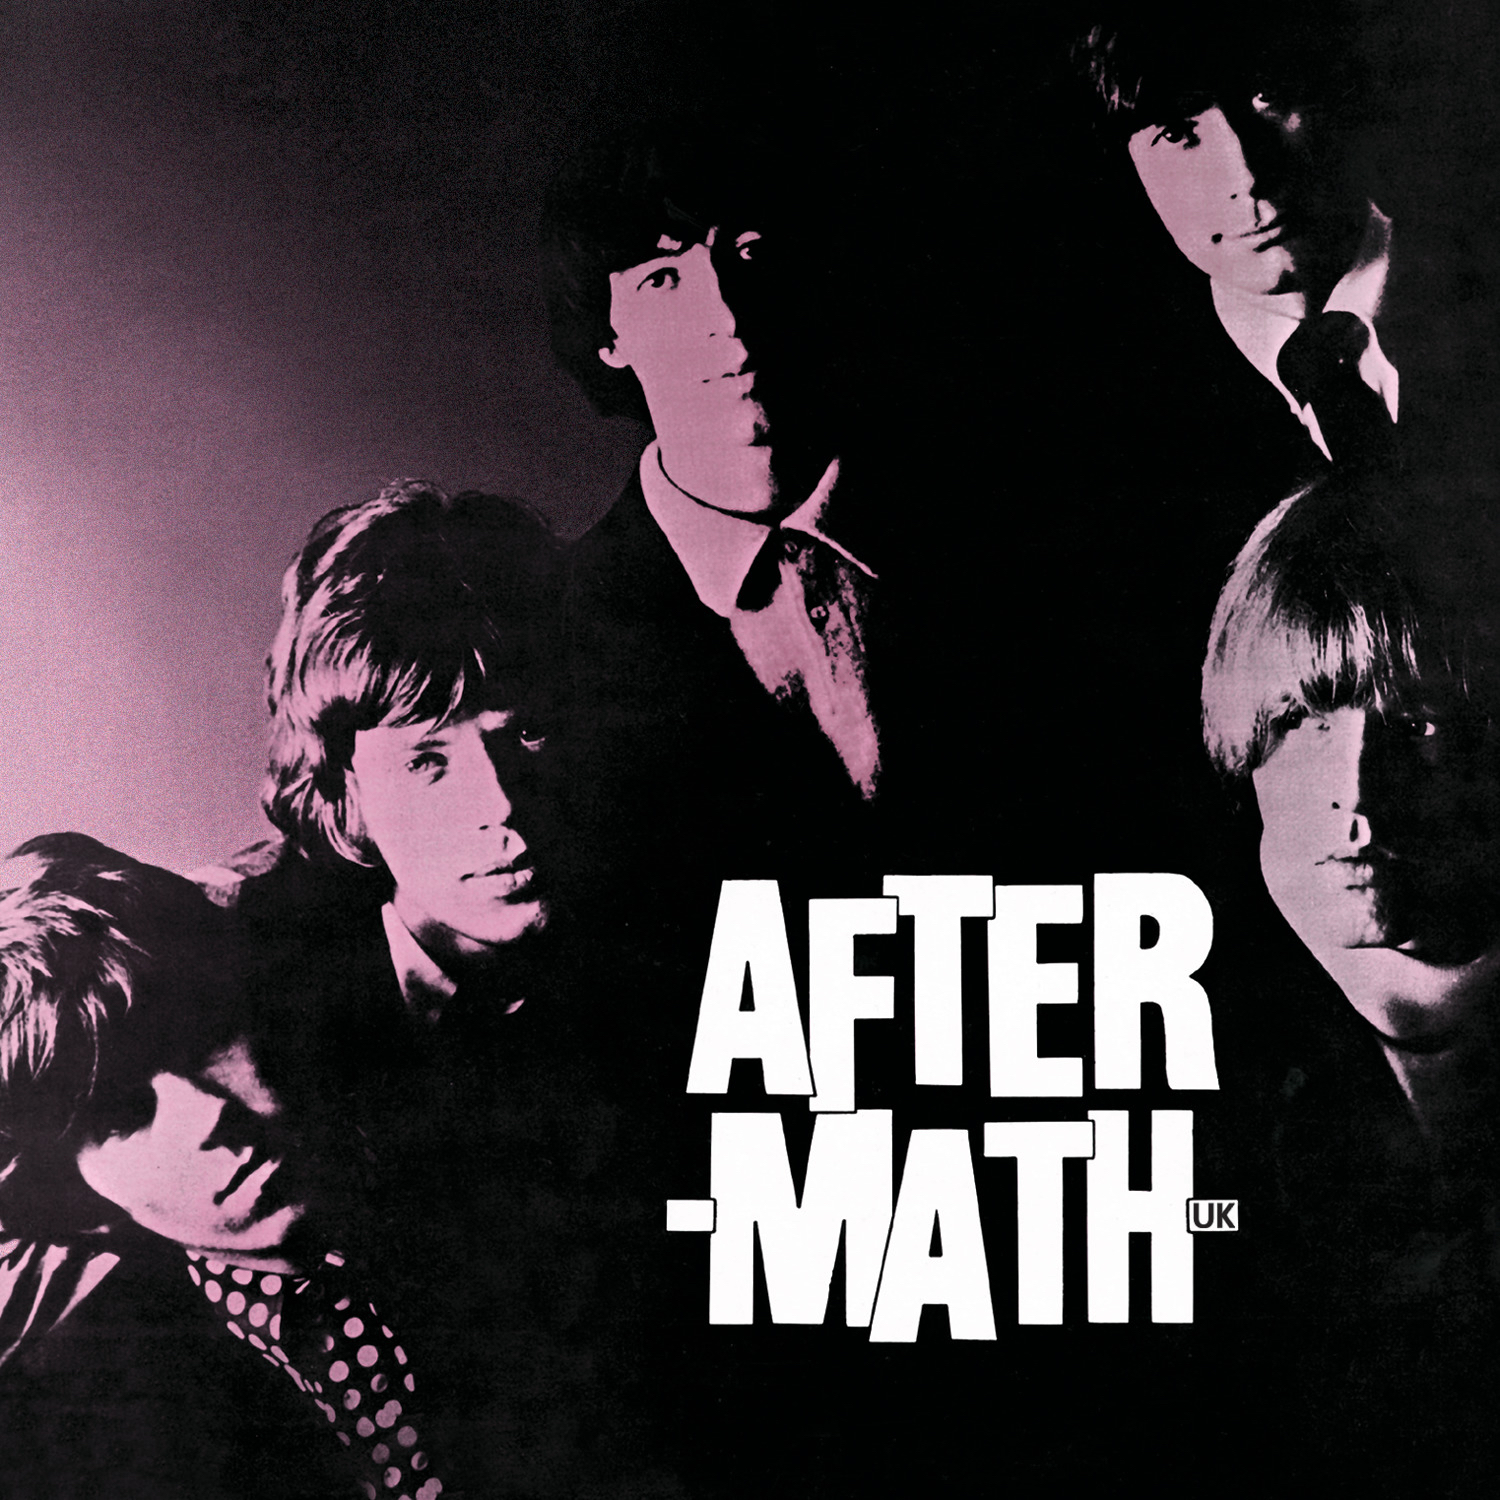 The Rolling Stones Aftermath (UK) cover artwork